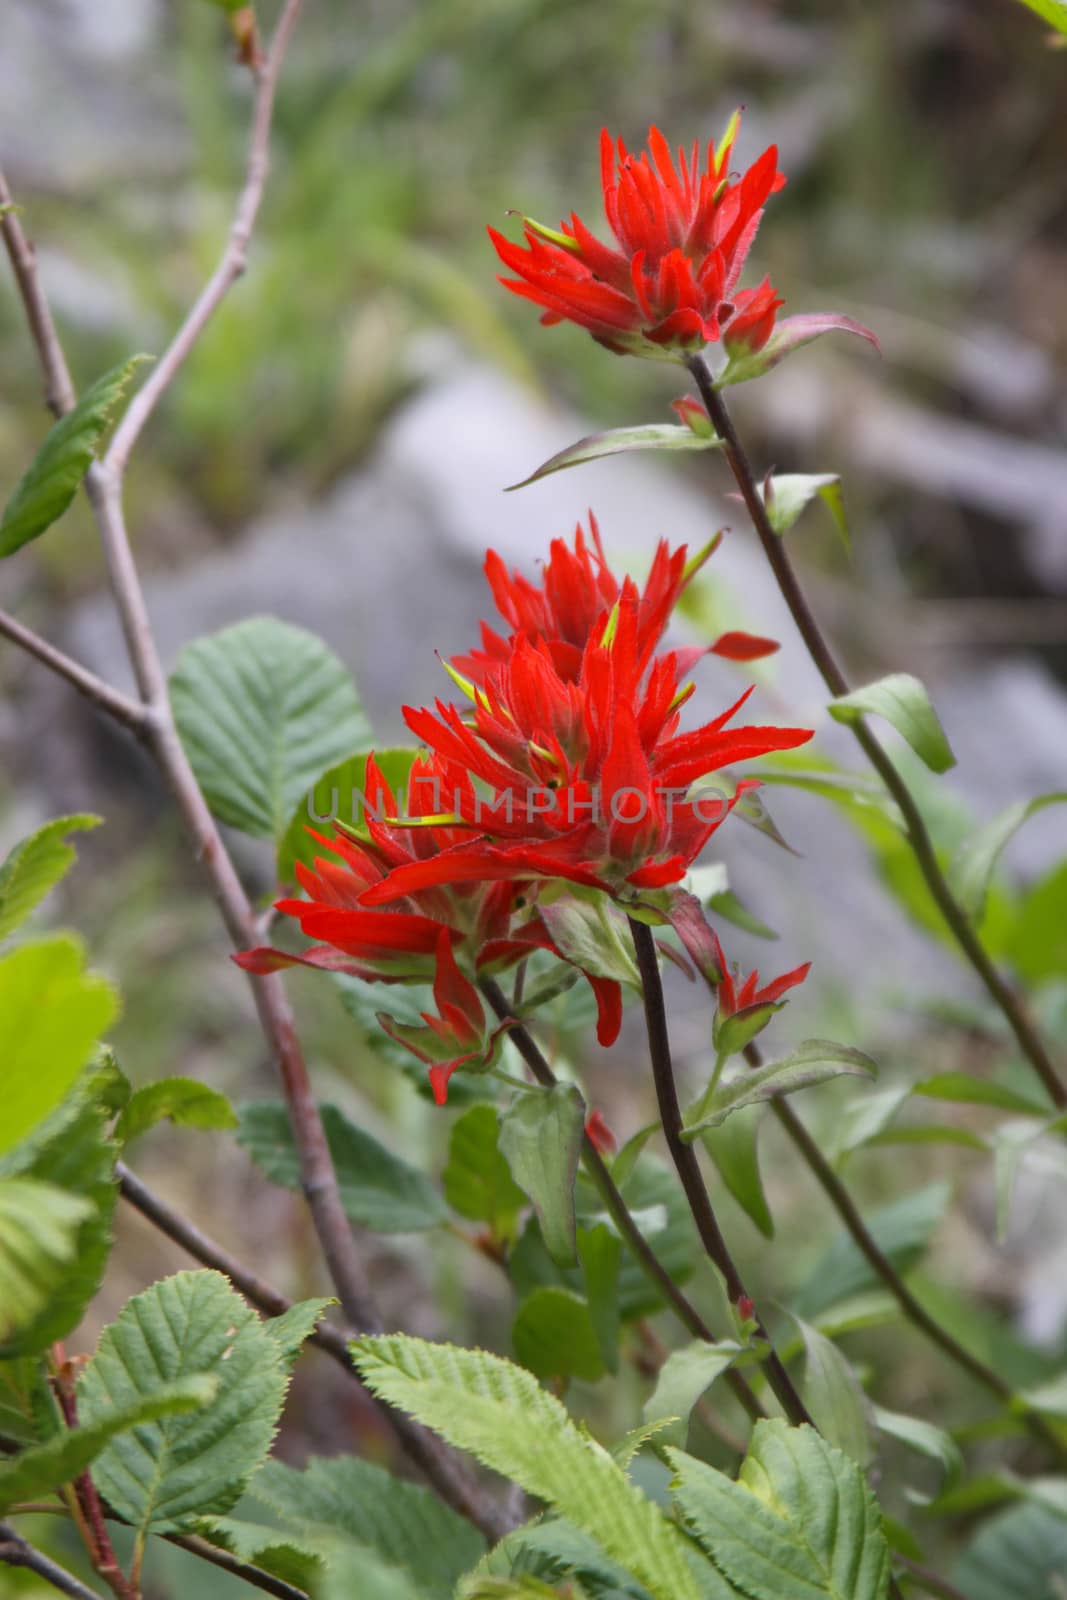 Mountain wildflowers commonly known as Indian Paintbrush.